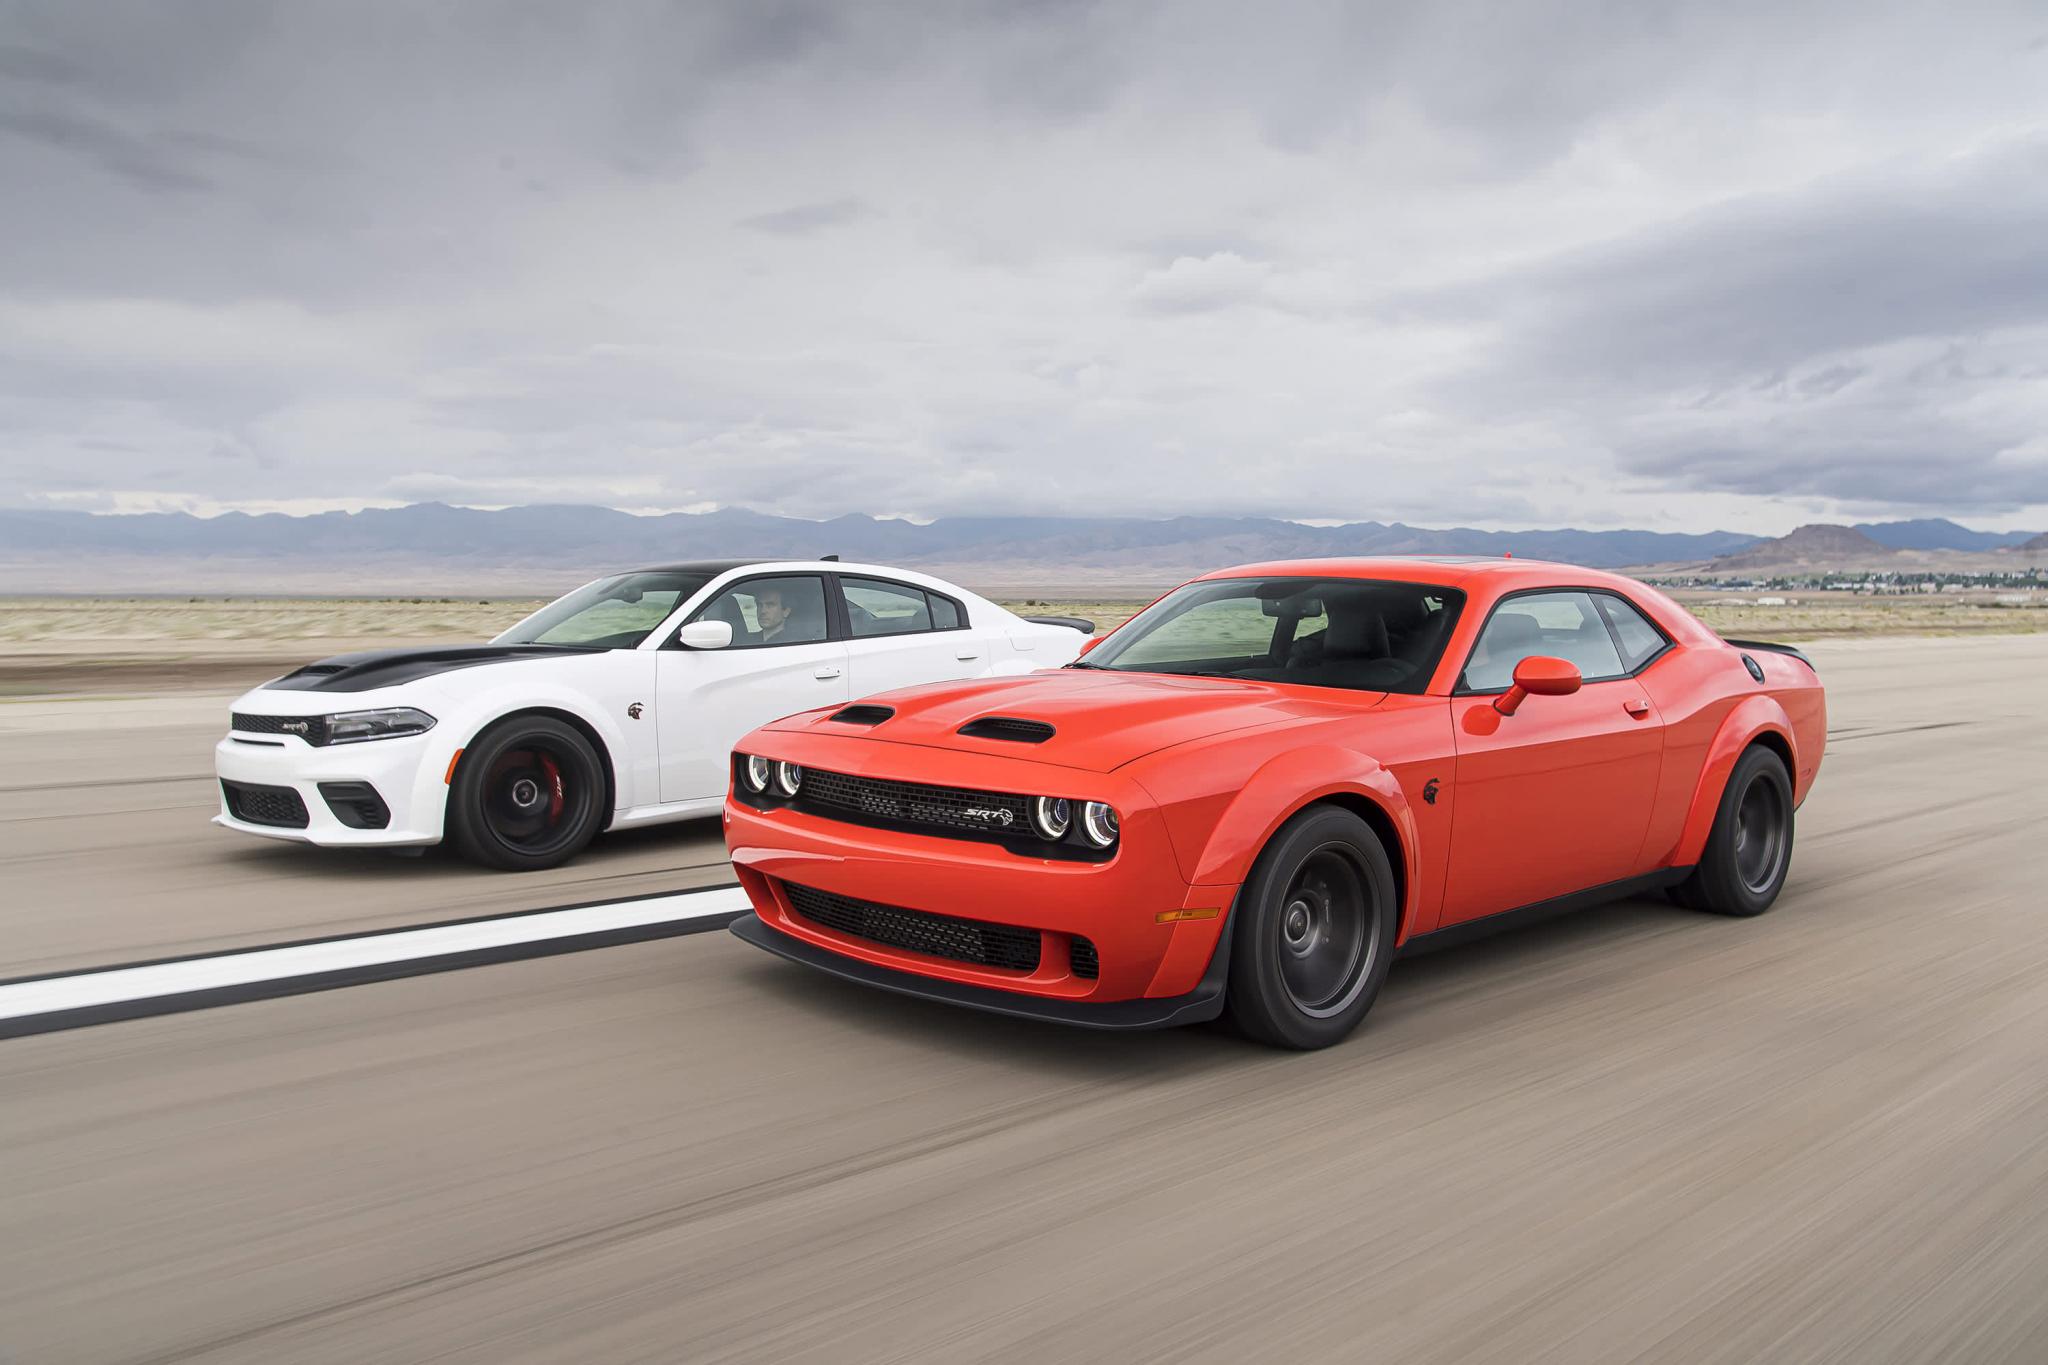 Dodge will discontinue its Challenger and Charger muscle cars next year-107103919-1660581384623-dg022_007mmvbuelk733k0leths8qttqfoo07-jpg